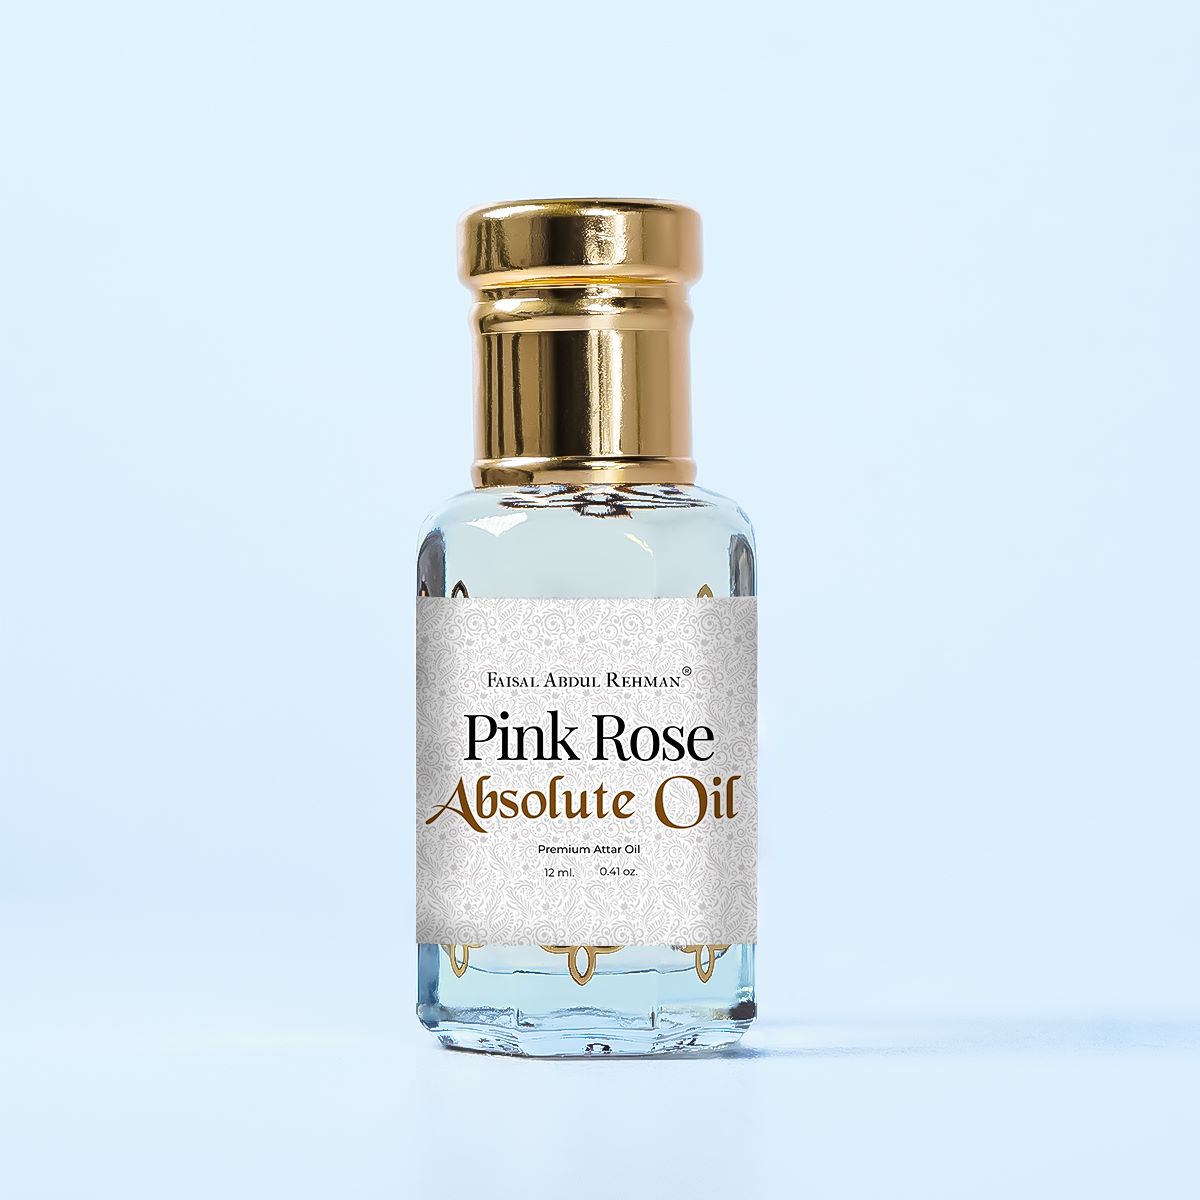 Black Rose Absolute, Pink Rose Absolute Oil, Red Rose Absolute Oil 12ml Each, Pack Of 3- Faisal Abdul Rehman Attar